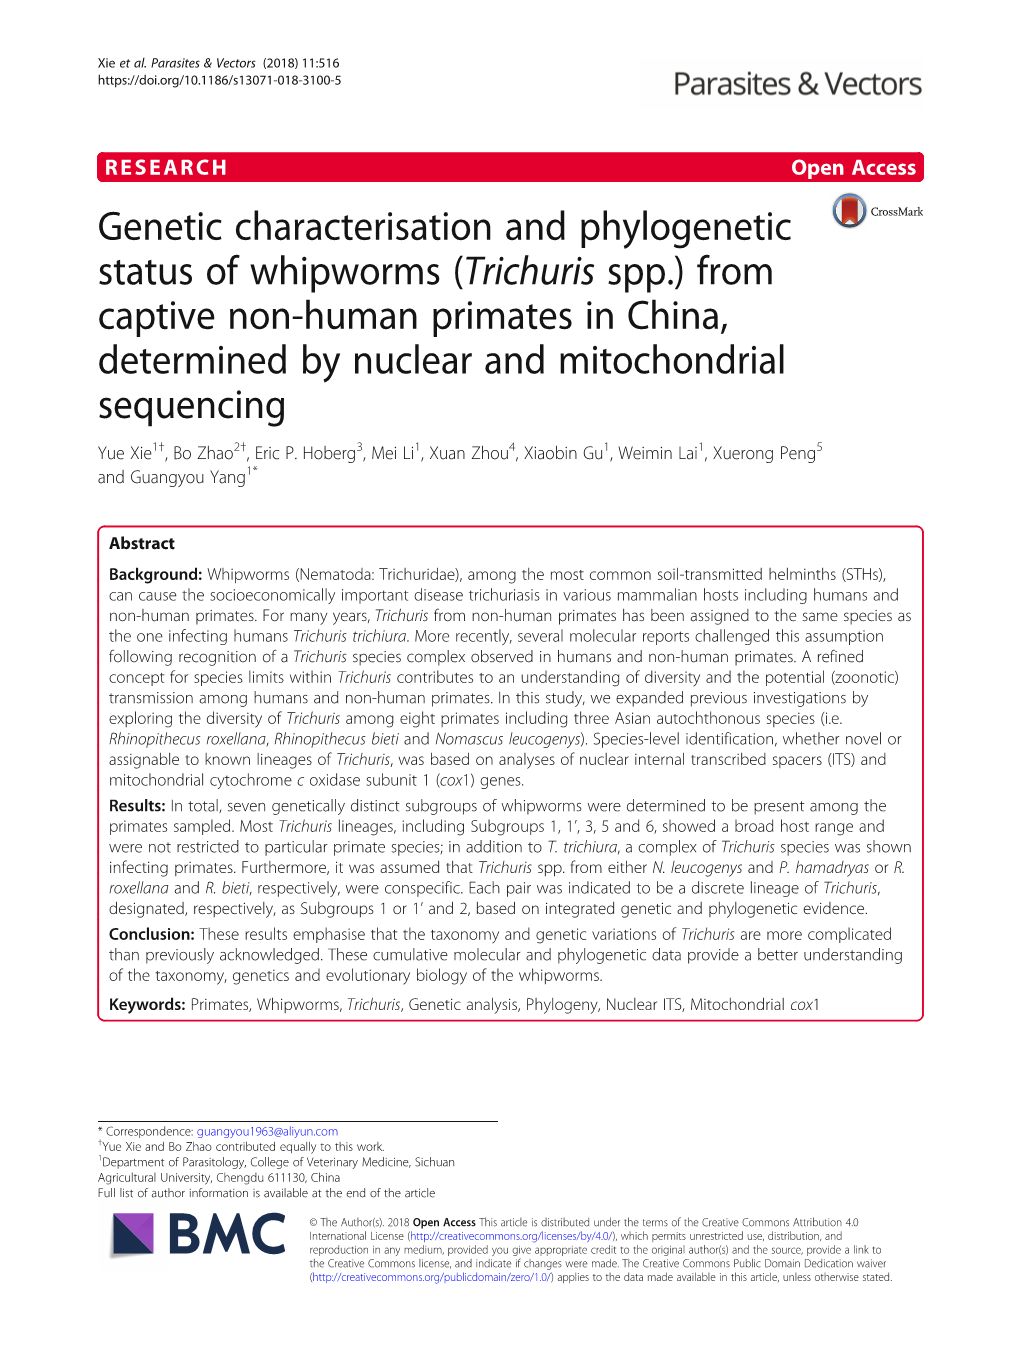 (Trichuris Spp.) from Captive Non-Human Primates in China, Determined by Nuclear and Mitochondrial Sequencing Yue Xie1†, Bo Zhao2†, Eric P